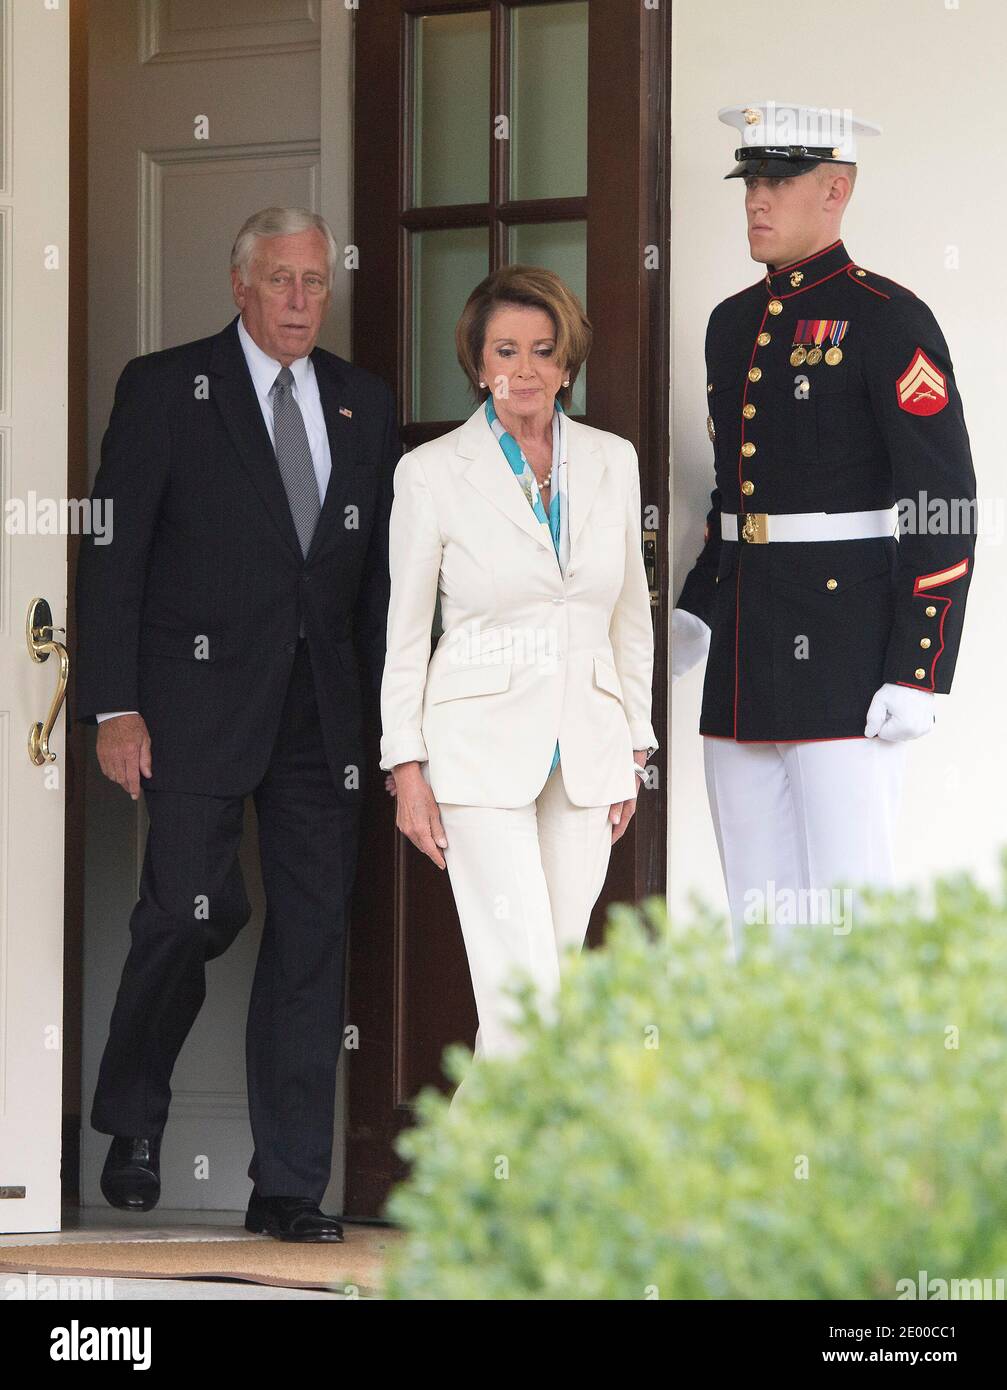 United States House Democratic Leader Nancy Pelosi (Democrat of California), and U.S. House Democratic Whip Steny Hoyer (Democrat of Maryland), depart the White House following their meeting with U.S. President Barack Obama in Washington, D.C. on Tuesday, October 15, 2013. Washington, DC, USA, October 15, 2013. Photo by Ron Sachs/CNP/ABACAPRESS.COM Stock Photo